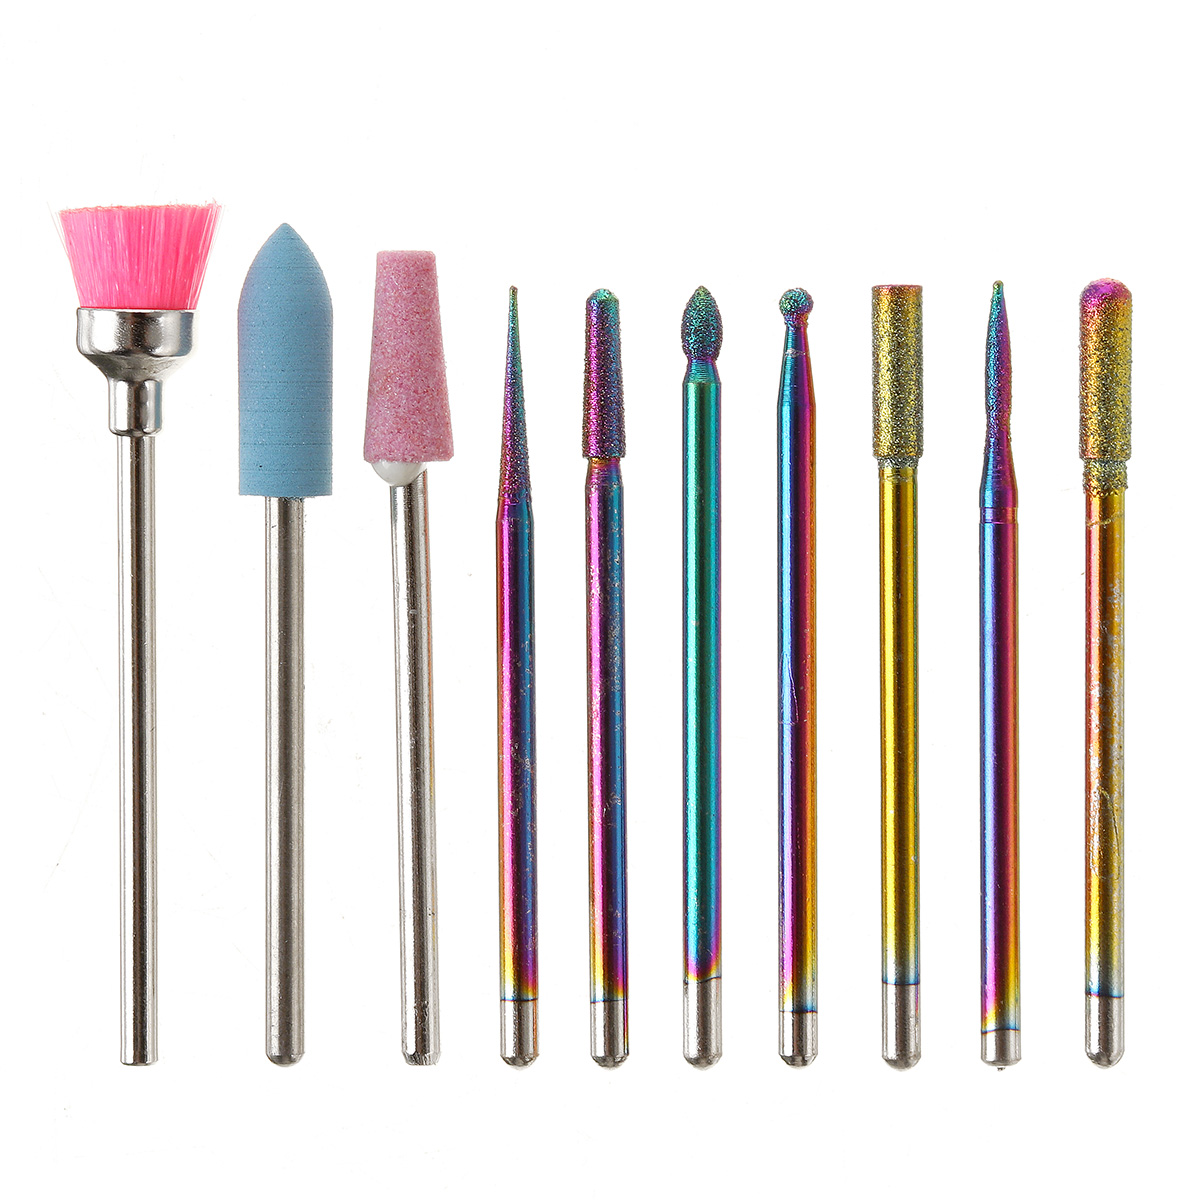 10pcs-Nail-Art-Color-Tungsten-Carbide-Grinding-Drill-Bits-Electric-Nails-Machine-Bit-Grinding-Head-S-1754173-6